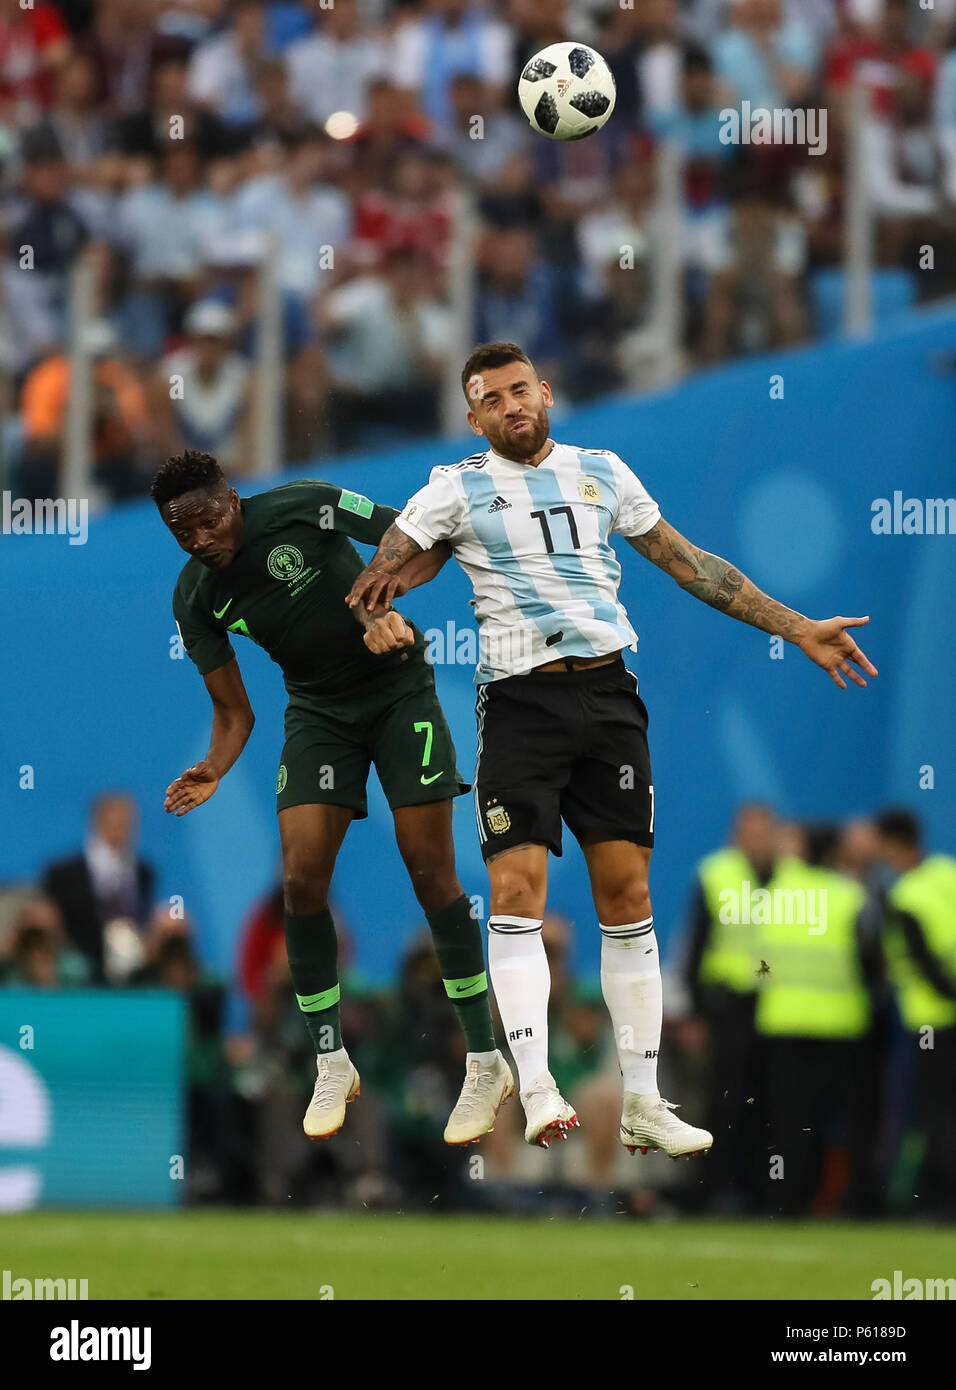 St Petersburg, Russia. 26th Jun, 2018. Ahmed Musa of Nigeria and Nicolas Otamendi of Argentina during the 2018 FIFA World Cup Group D match between Nigeria and Argentina at Saint Petersburg Stadium on June 26th 2018 in Saint Petersburg, Russia. (Photo by Daniel Chesterton/phcimages.com) Credit: PHC Images/Alamy Live News Stock Photo